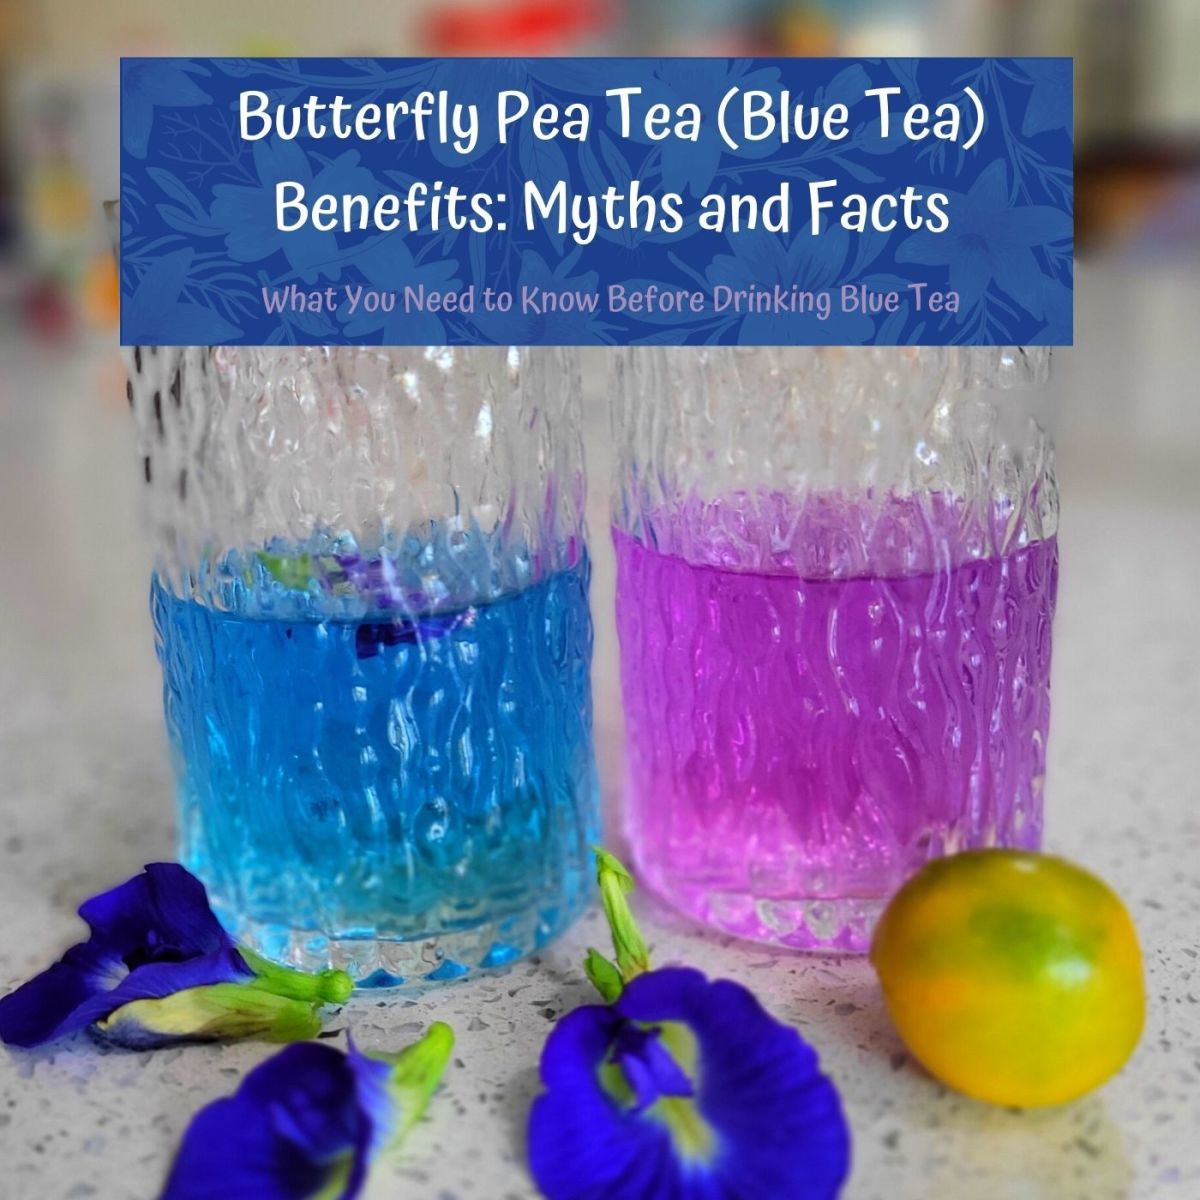 What you have read or heard on the butterfly pea tea (blue tea) benefits may not be right. Read on to learn more.